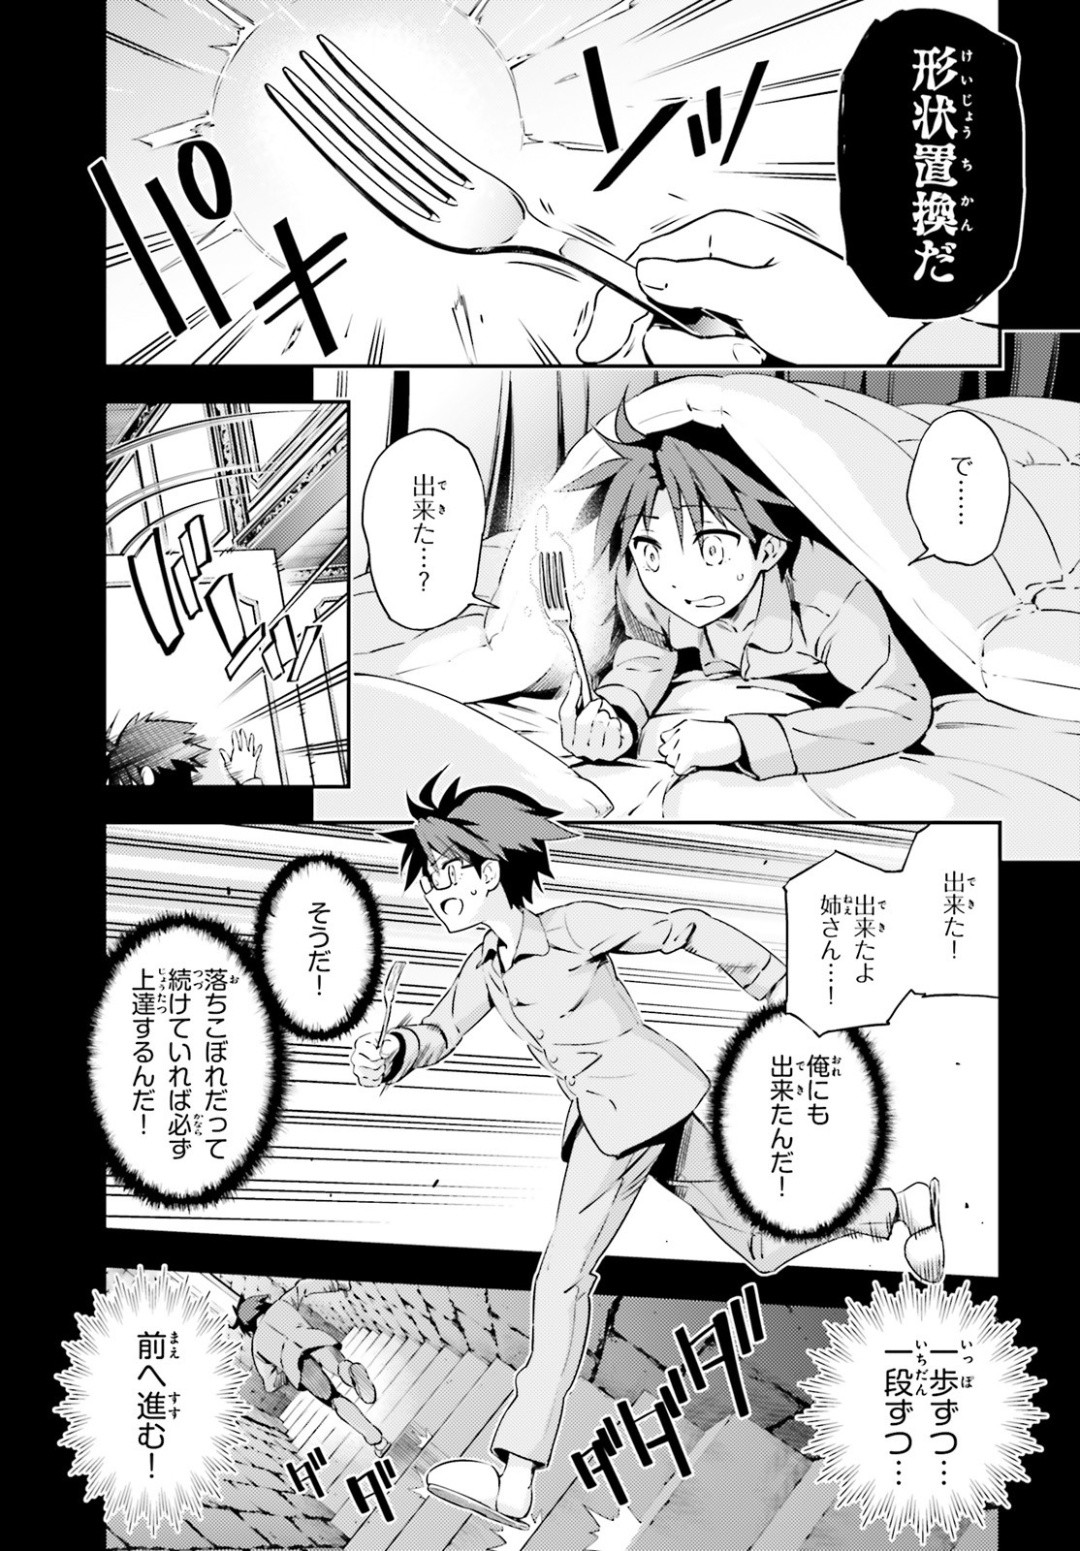 Fate/Kaleid Liner Prisma Illya Drei! - Chapter 56-1 - Page 13